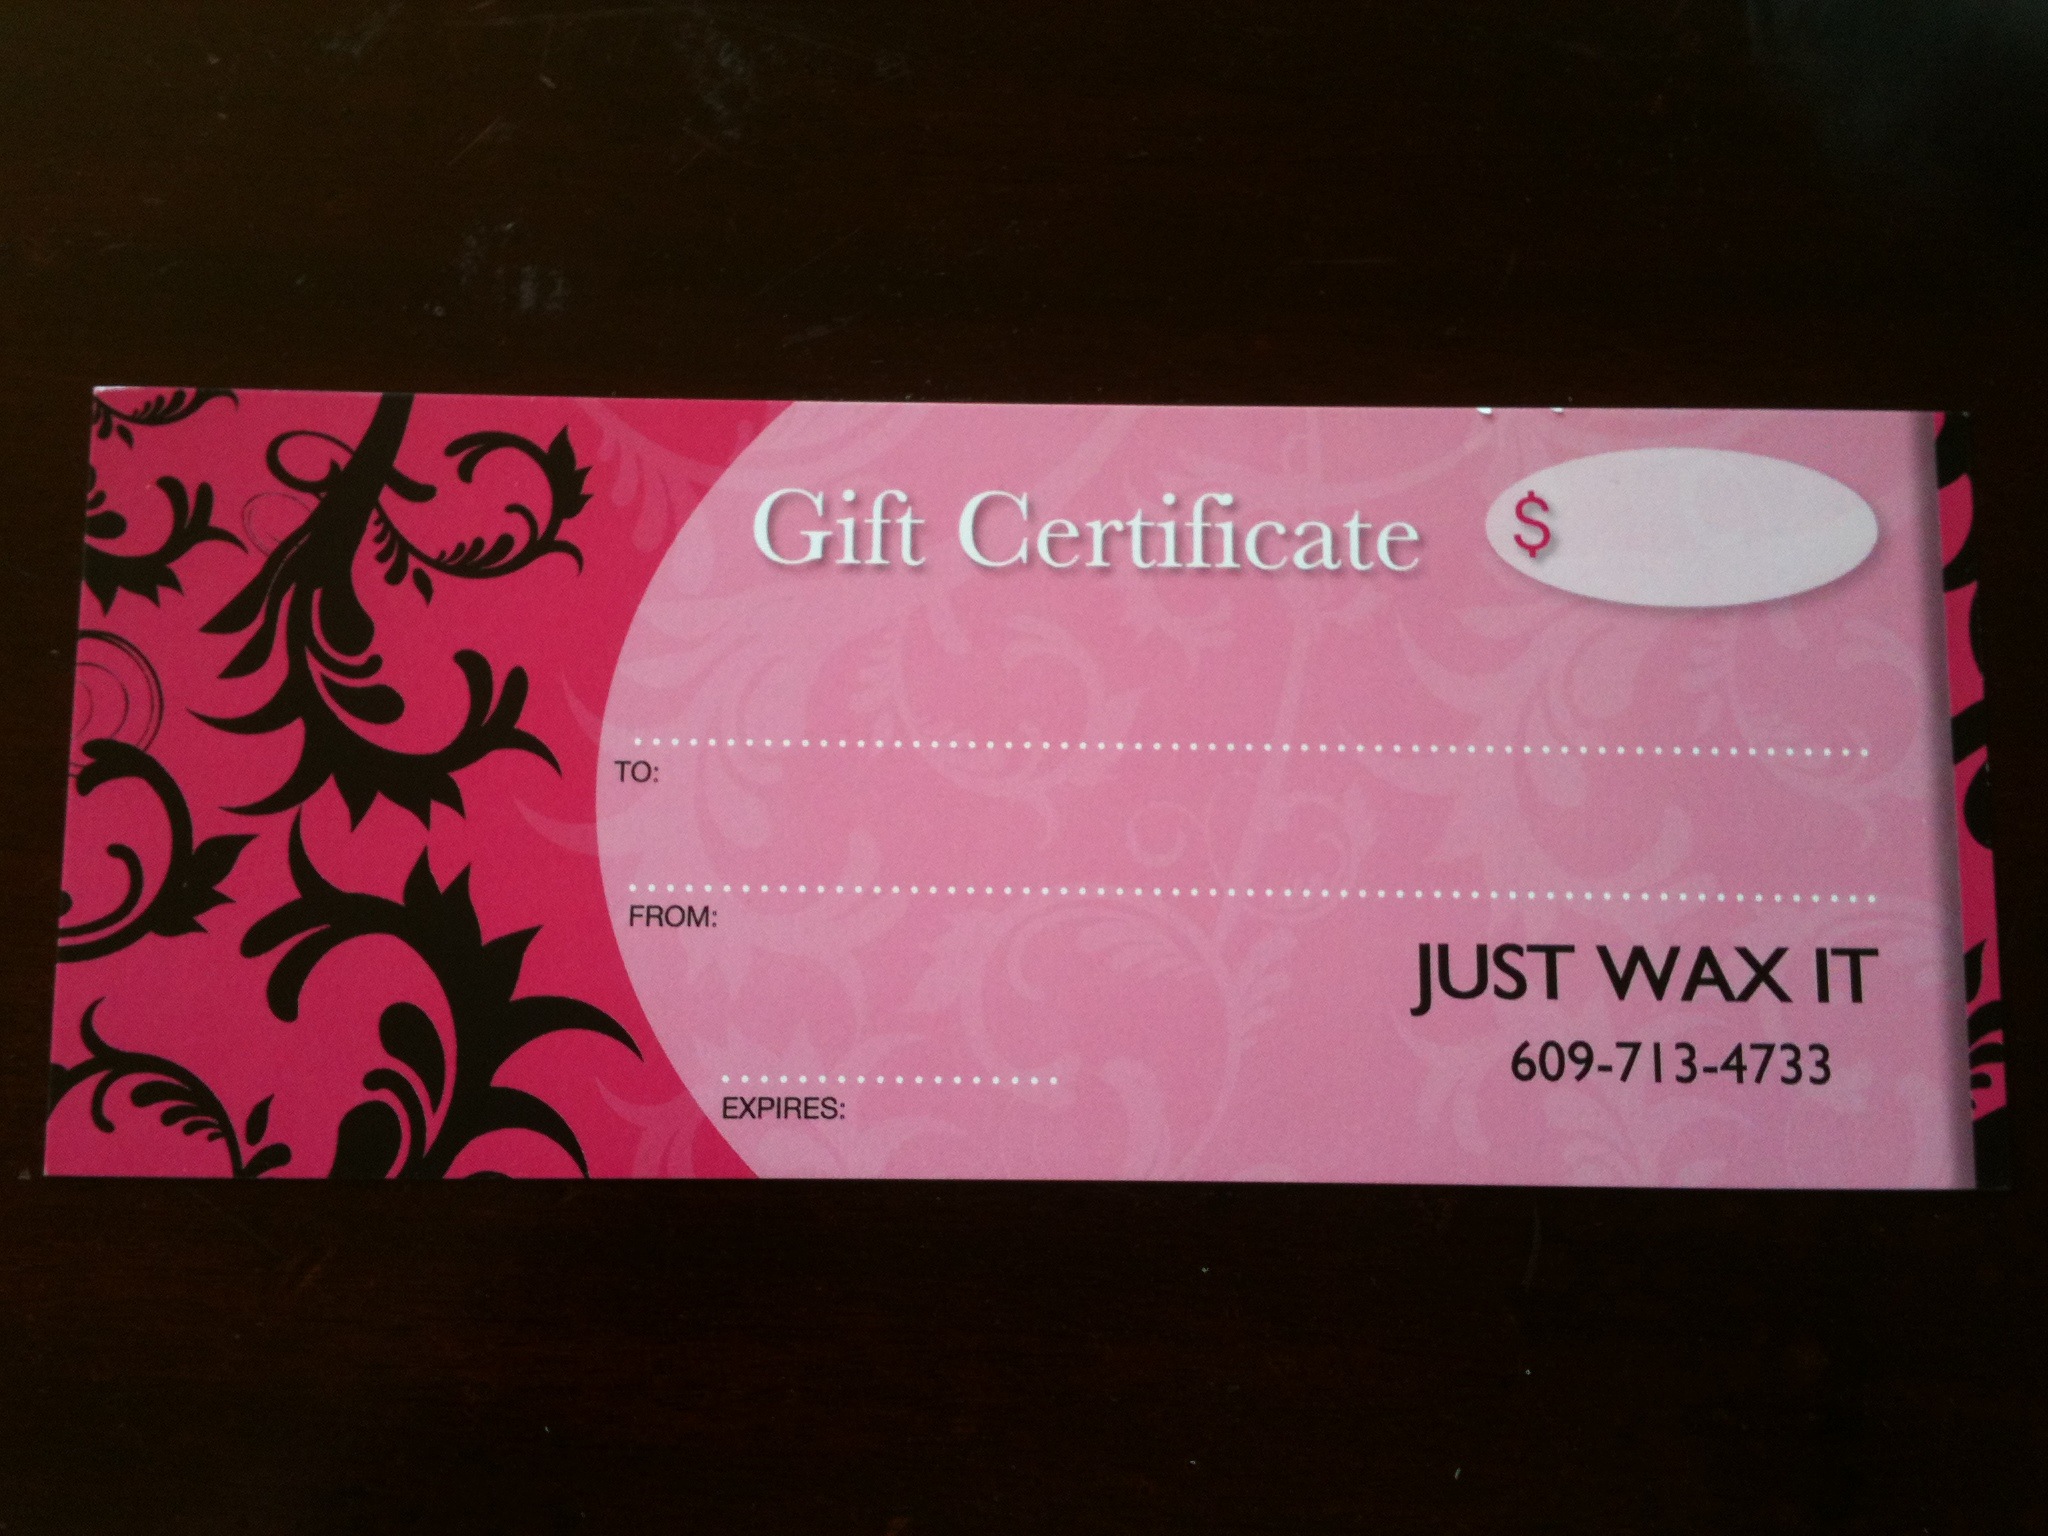 Order Your Gift Certifcates Today